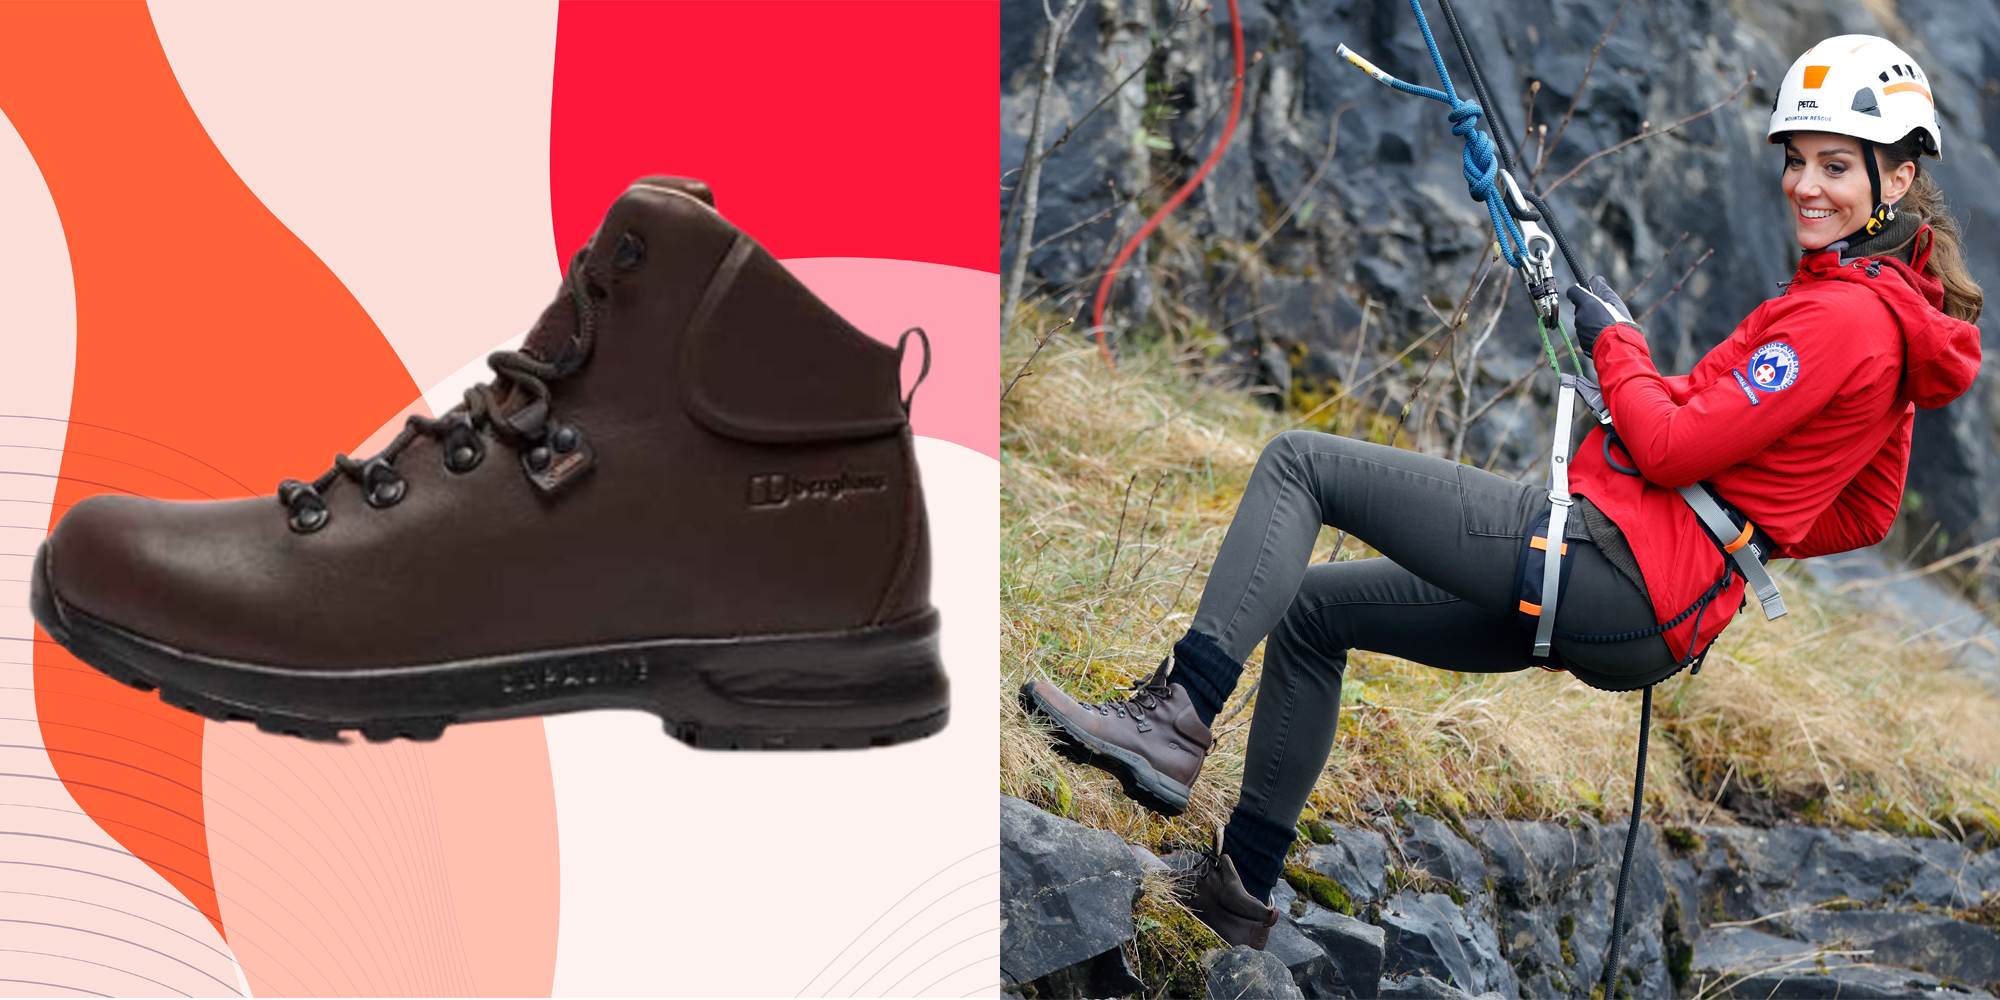 Waterproofing Hiking Boots: How to Maintain Vegan + Synthetic Boots